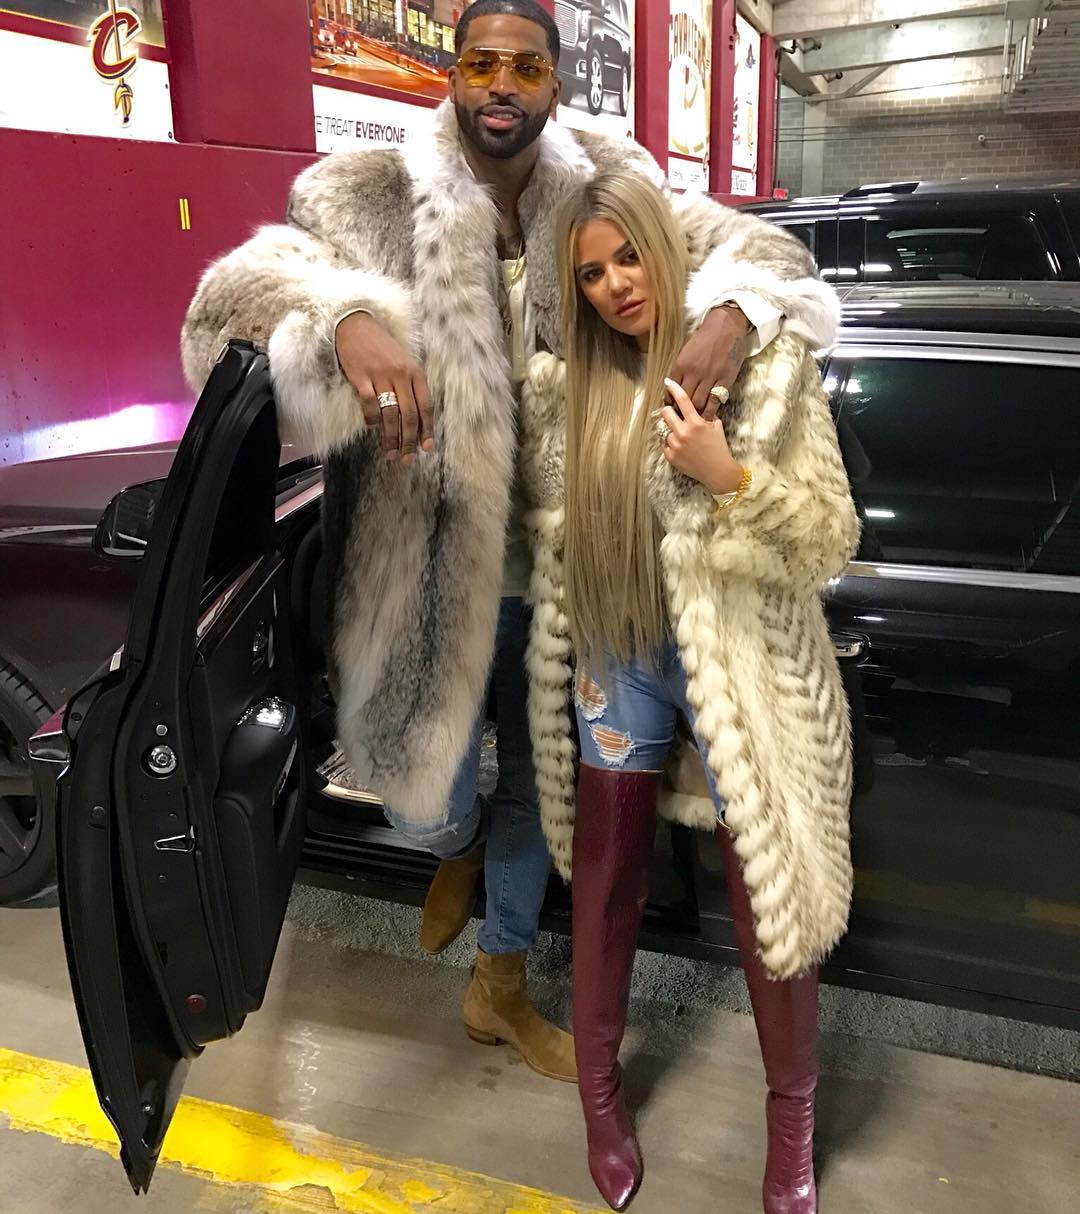 SPOTTED: Tristan Thompson Post Game In Fur Coat and Saint Laurent Boots